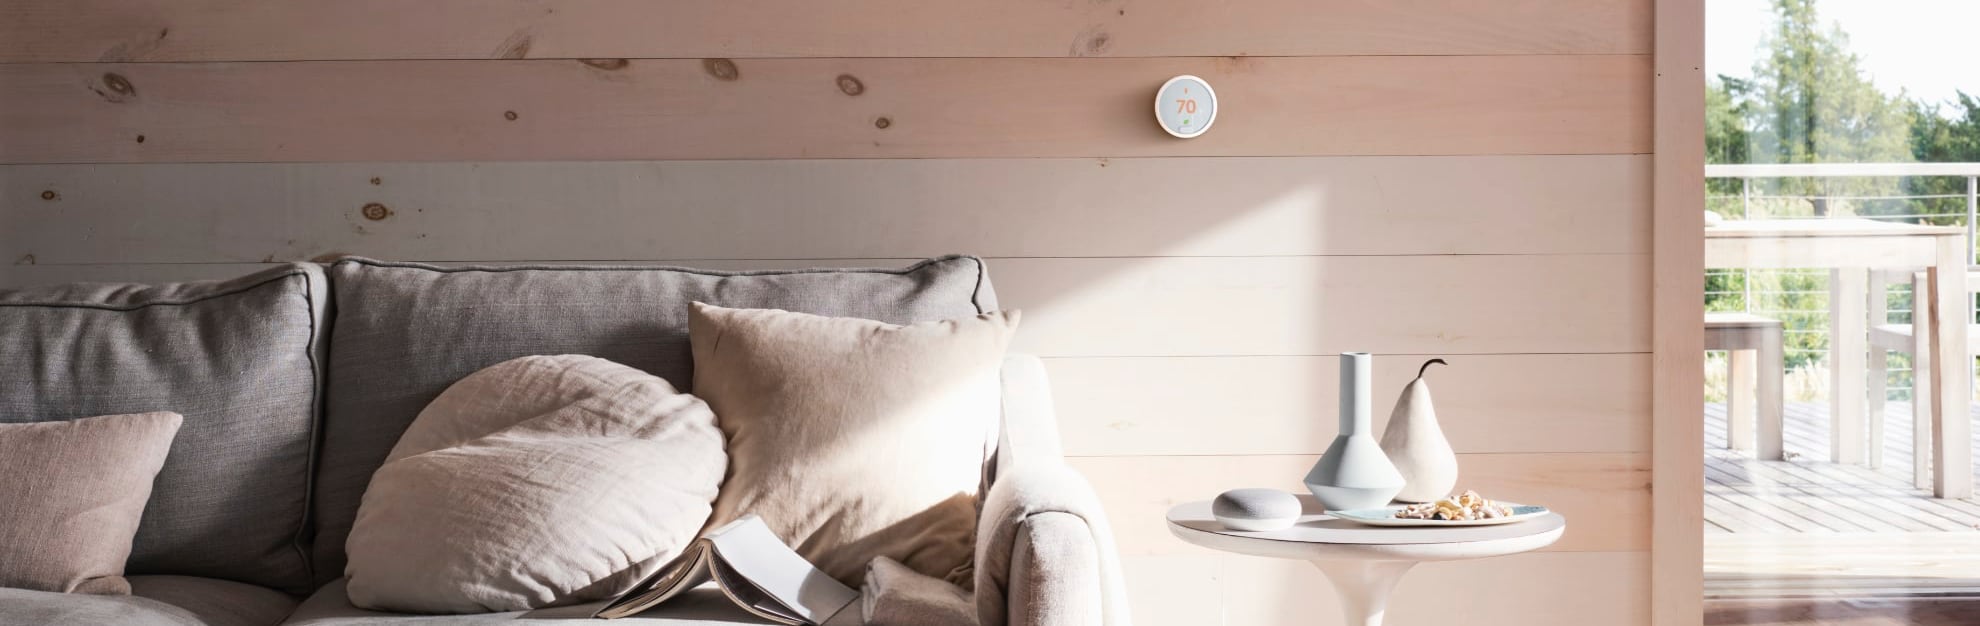 Vivint Home Automation in Killeen